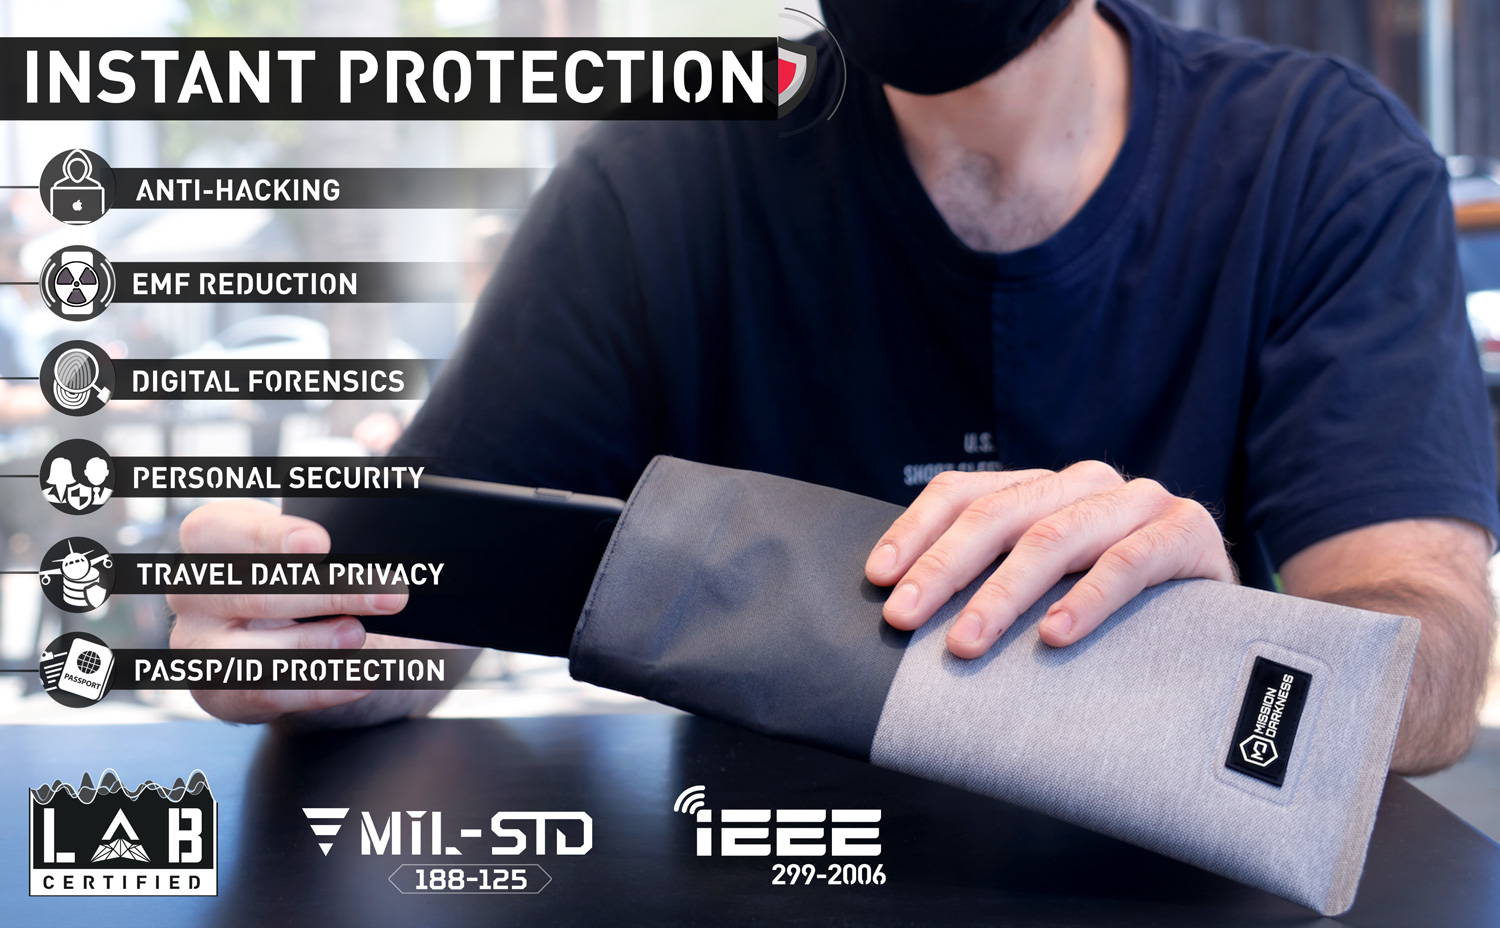 mission darkness faraday bags offer instant protection against digital threats